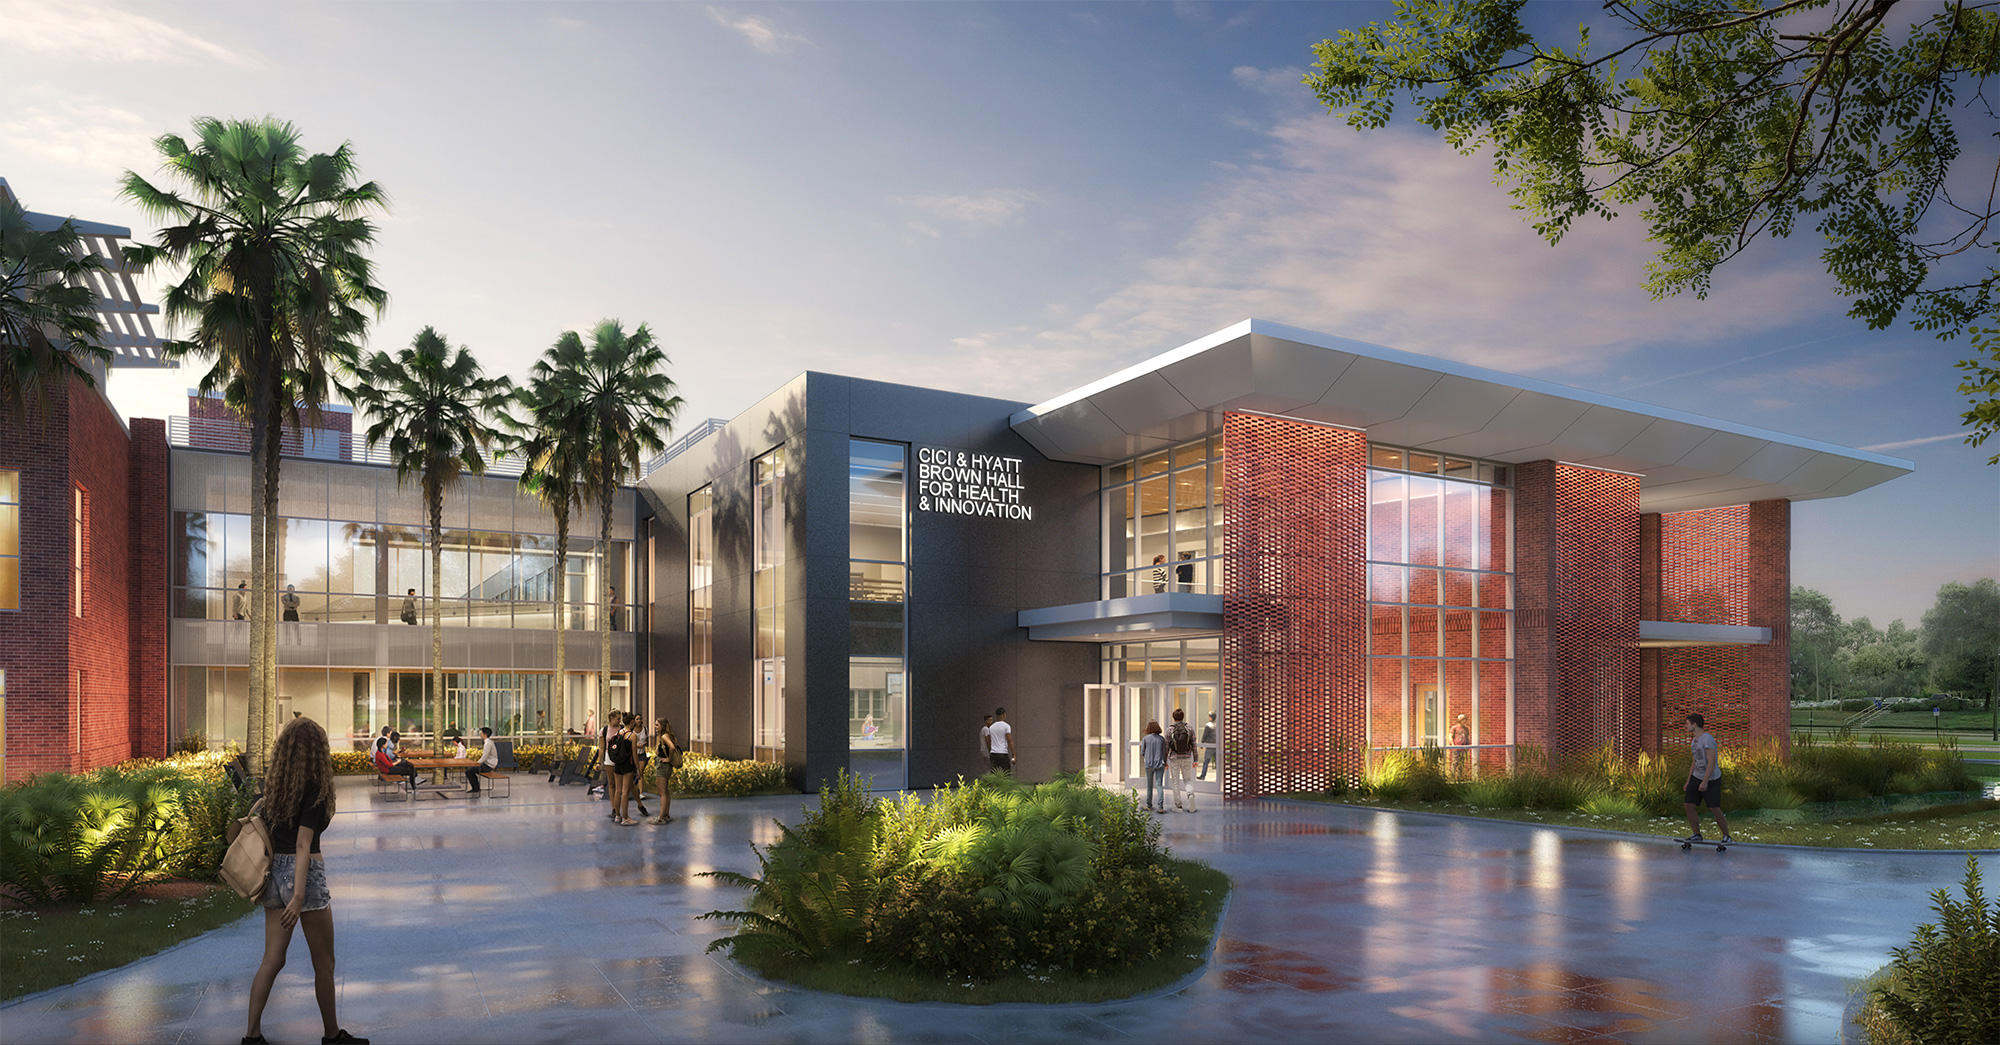 The new Cici & Hyatt Brown Hall for Health & Innovation will connect to Sage Hall